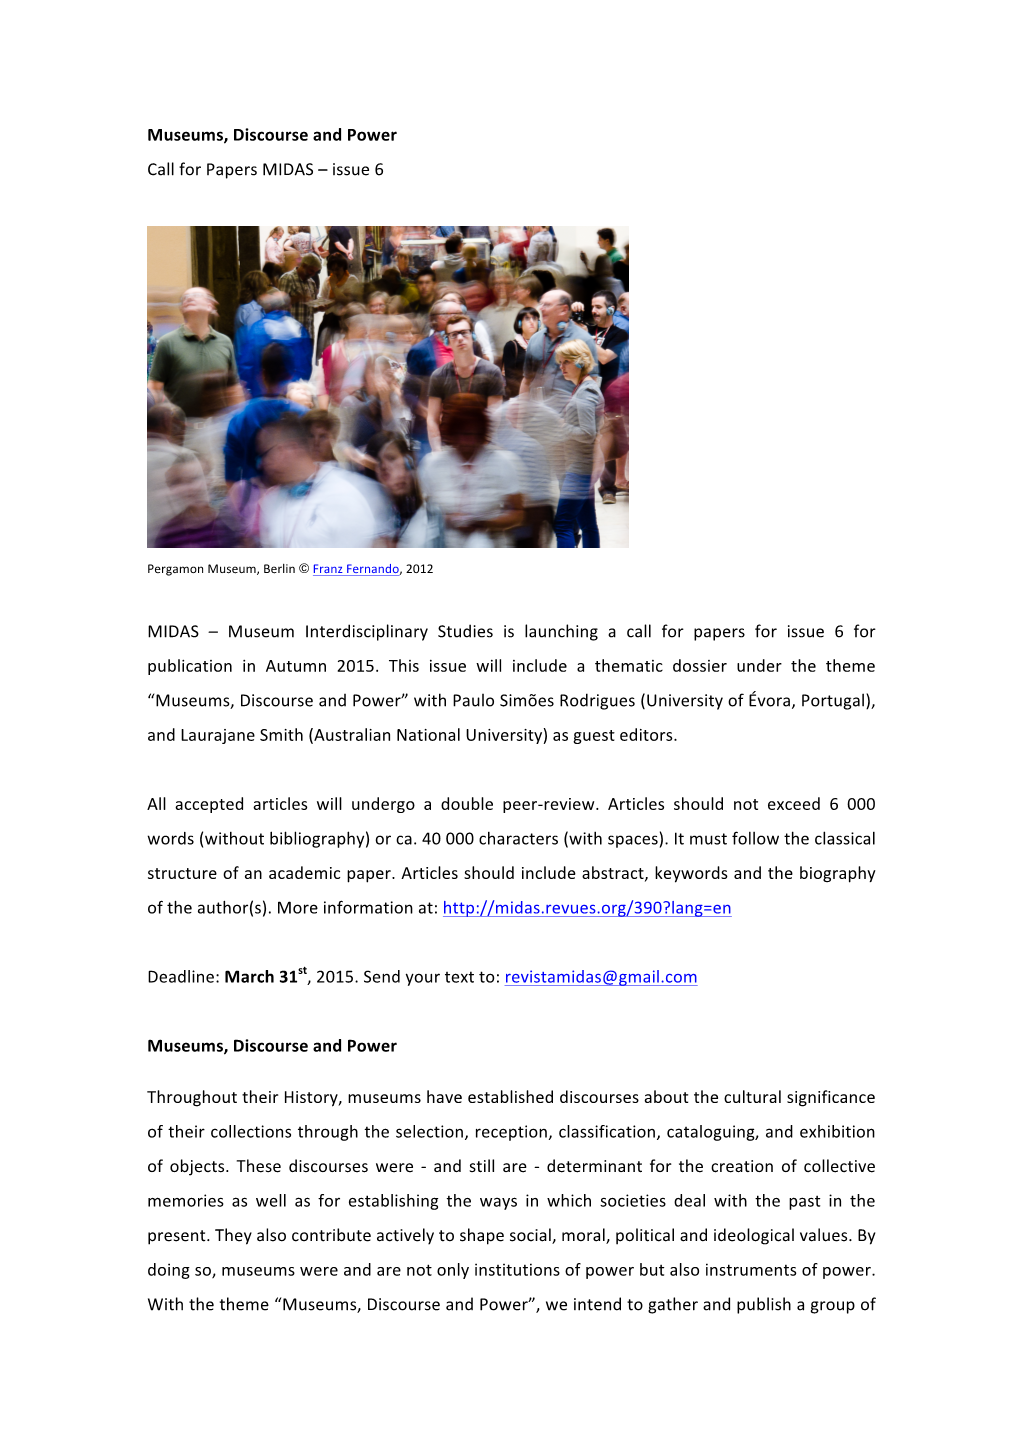 Museums, Discourse and Power Call for Papers MIDAS – Issue 6